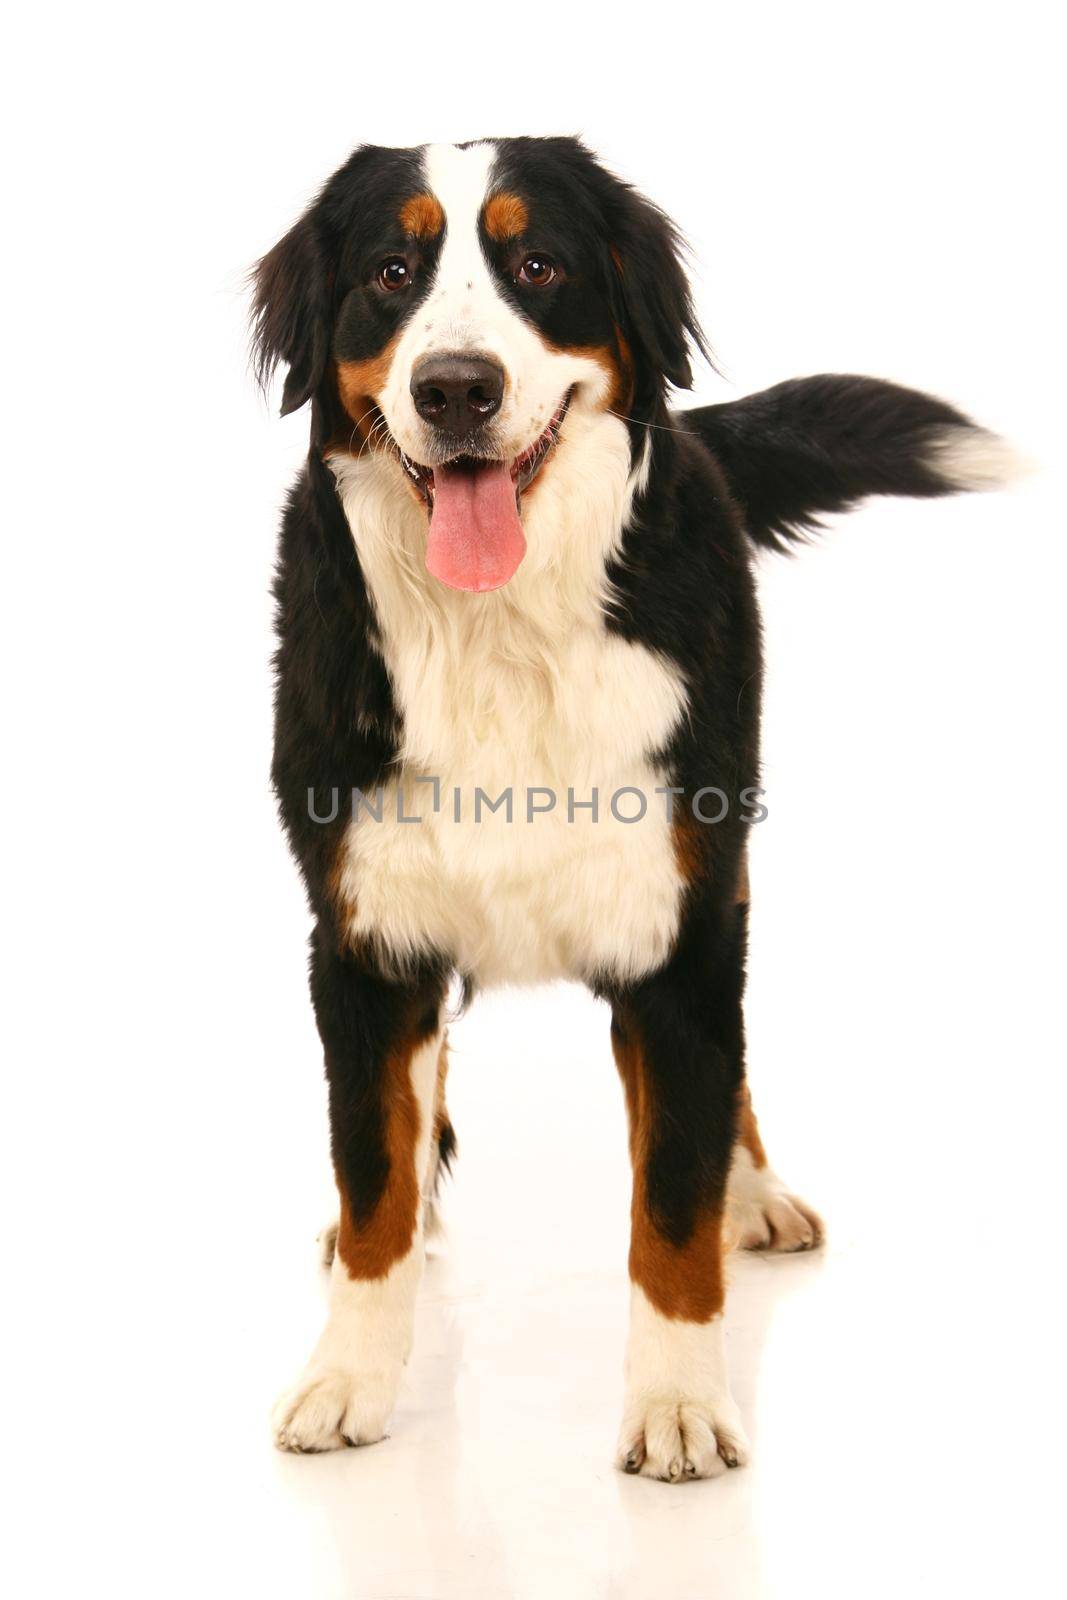 Bernese mountain dog on white by RosaJay